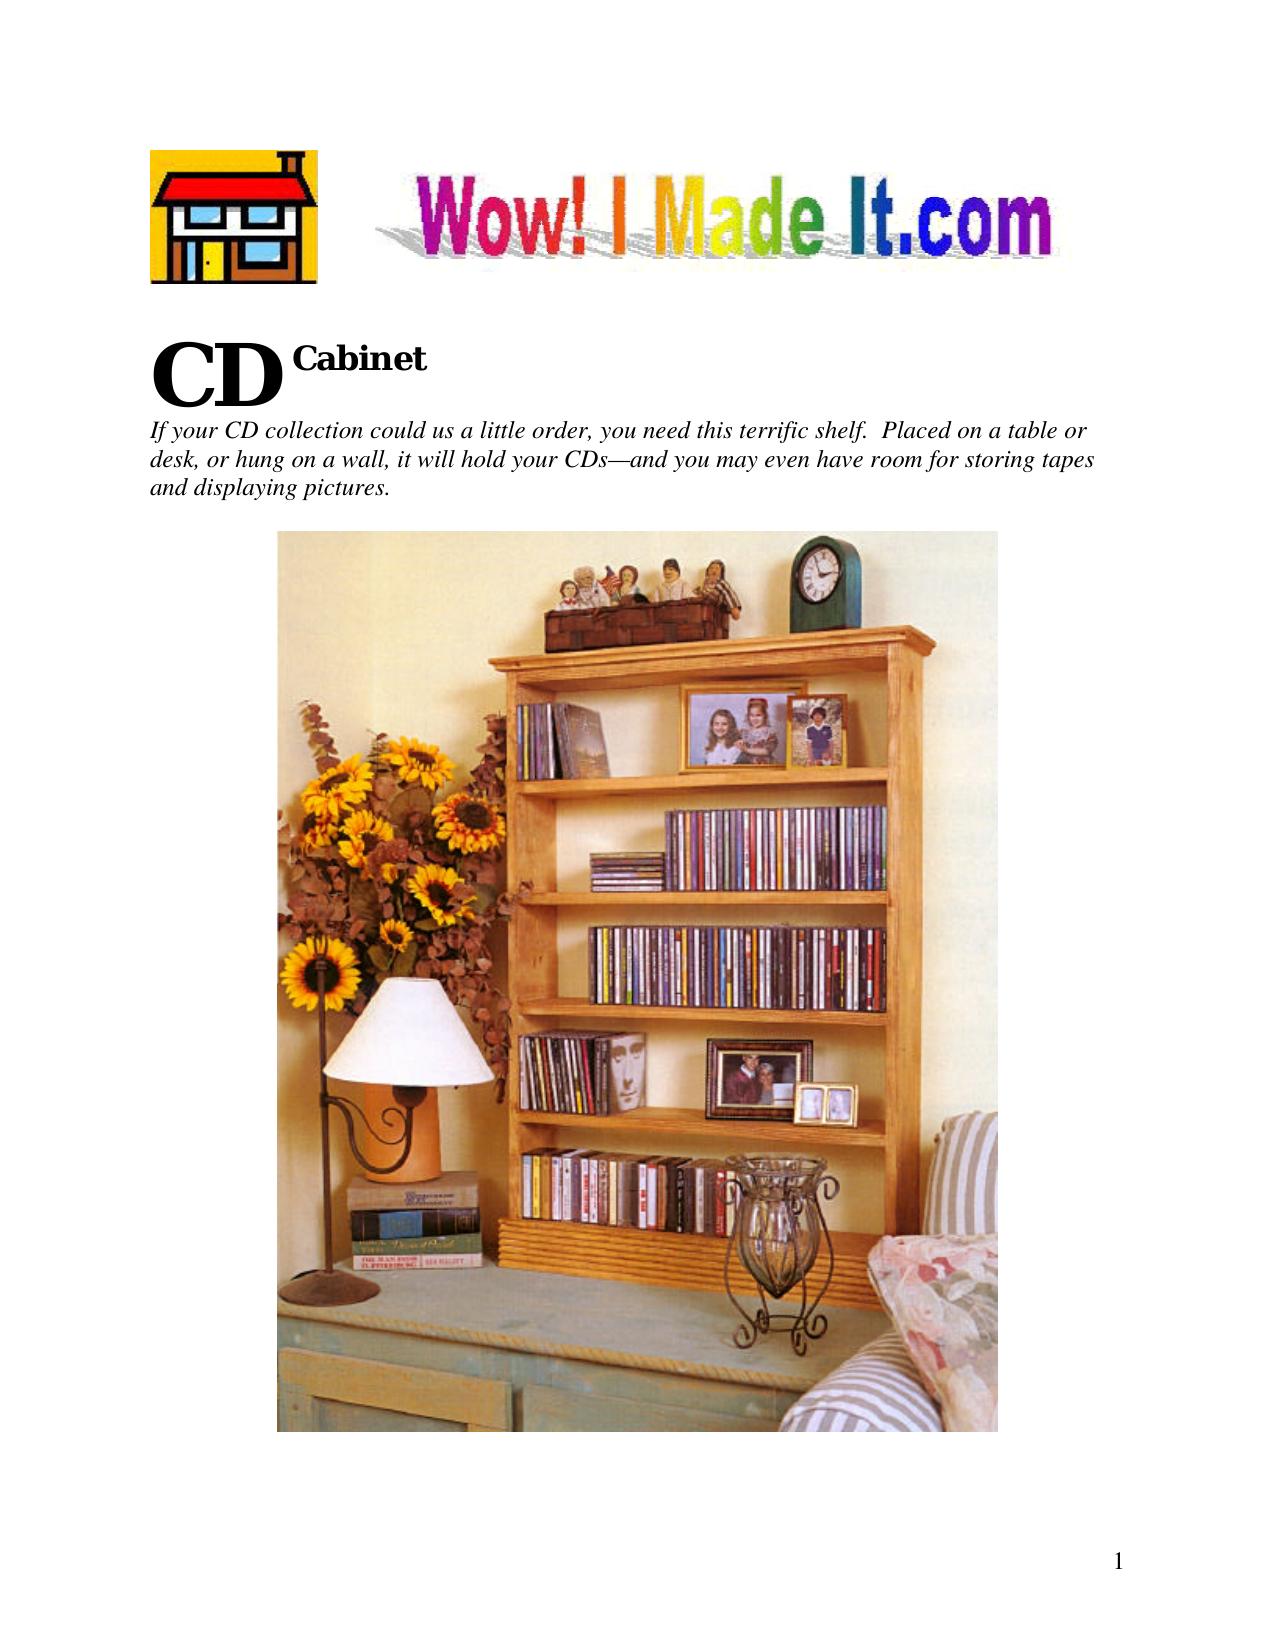 CD Cabinet by large-cd-cabinet